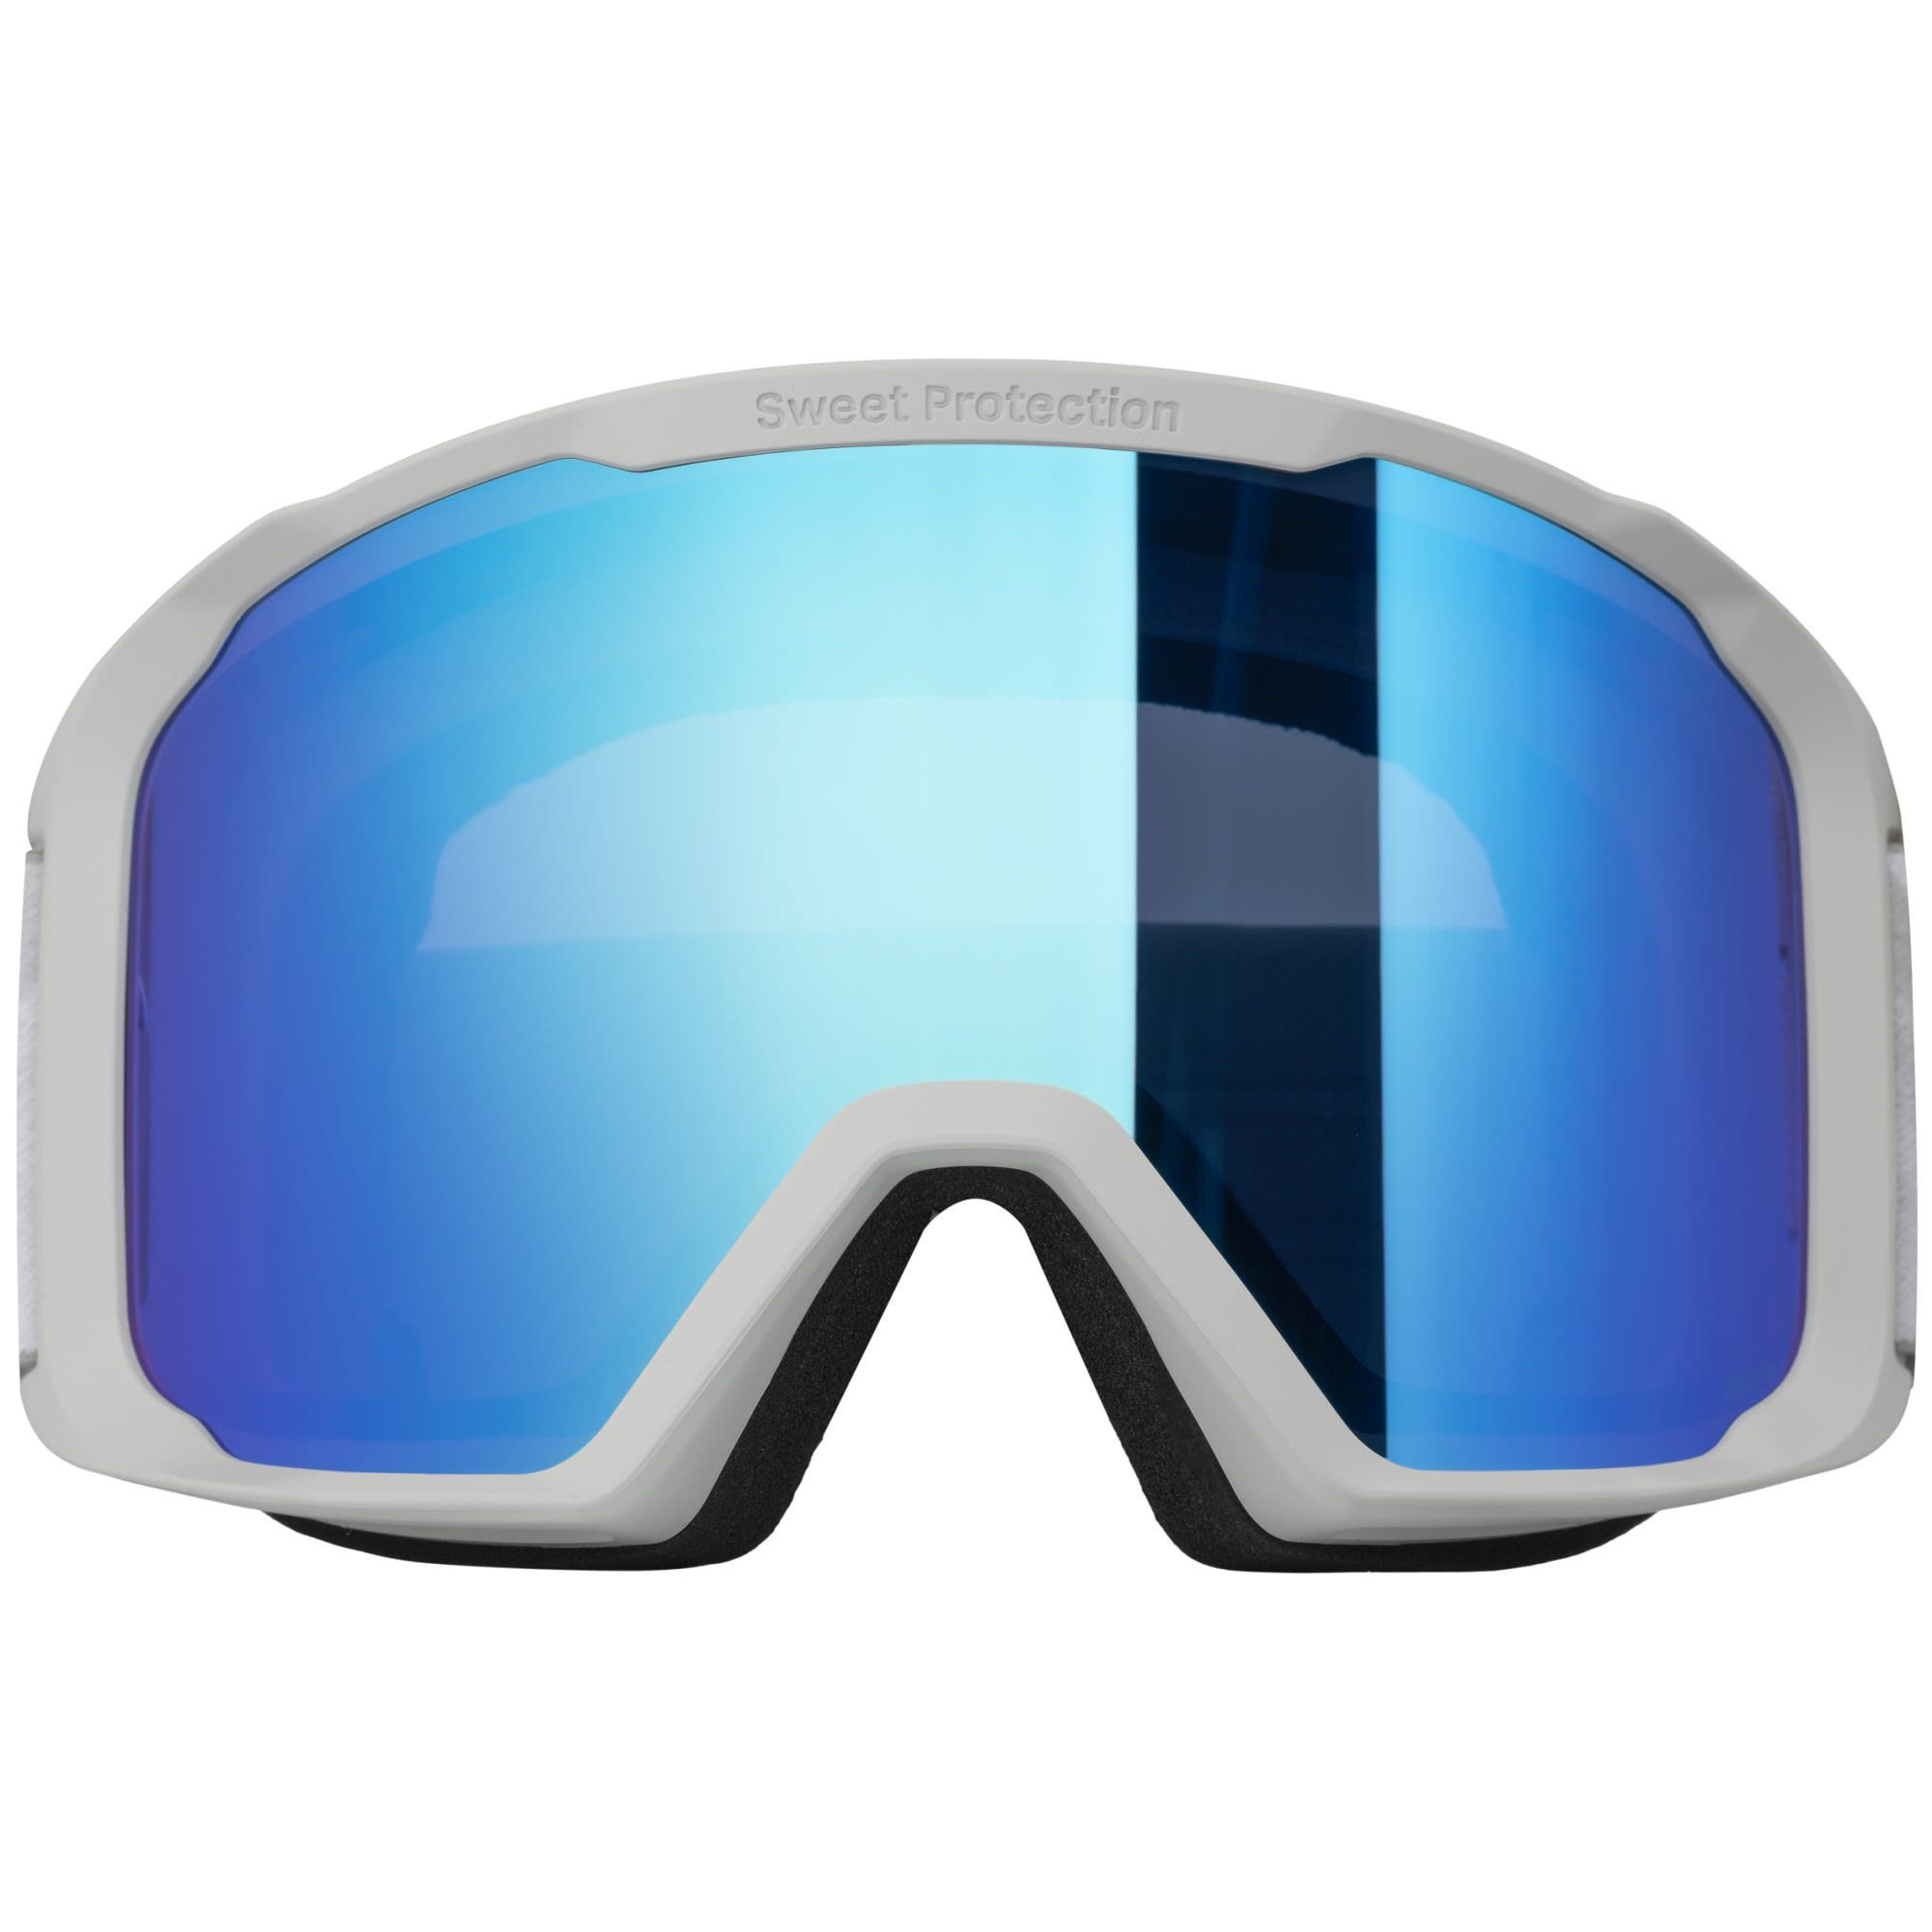 Sweet Protection Skibrille Sweet Accessoires White Durden Rig Protection RIG Bronco - - Reflect Peaks Aquamarine Bronco